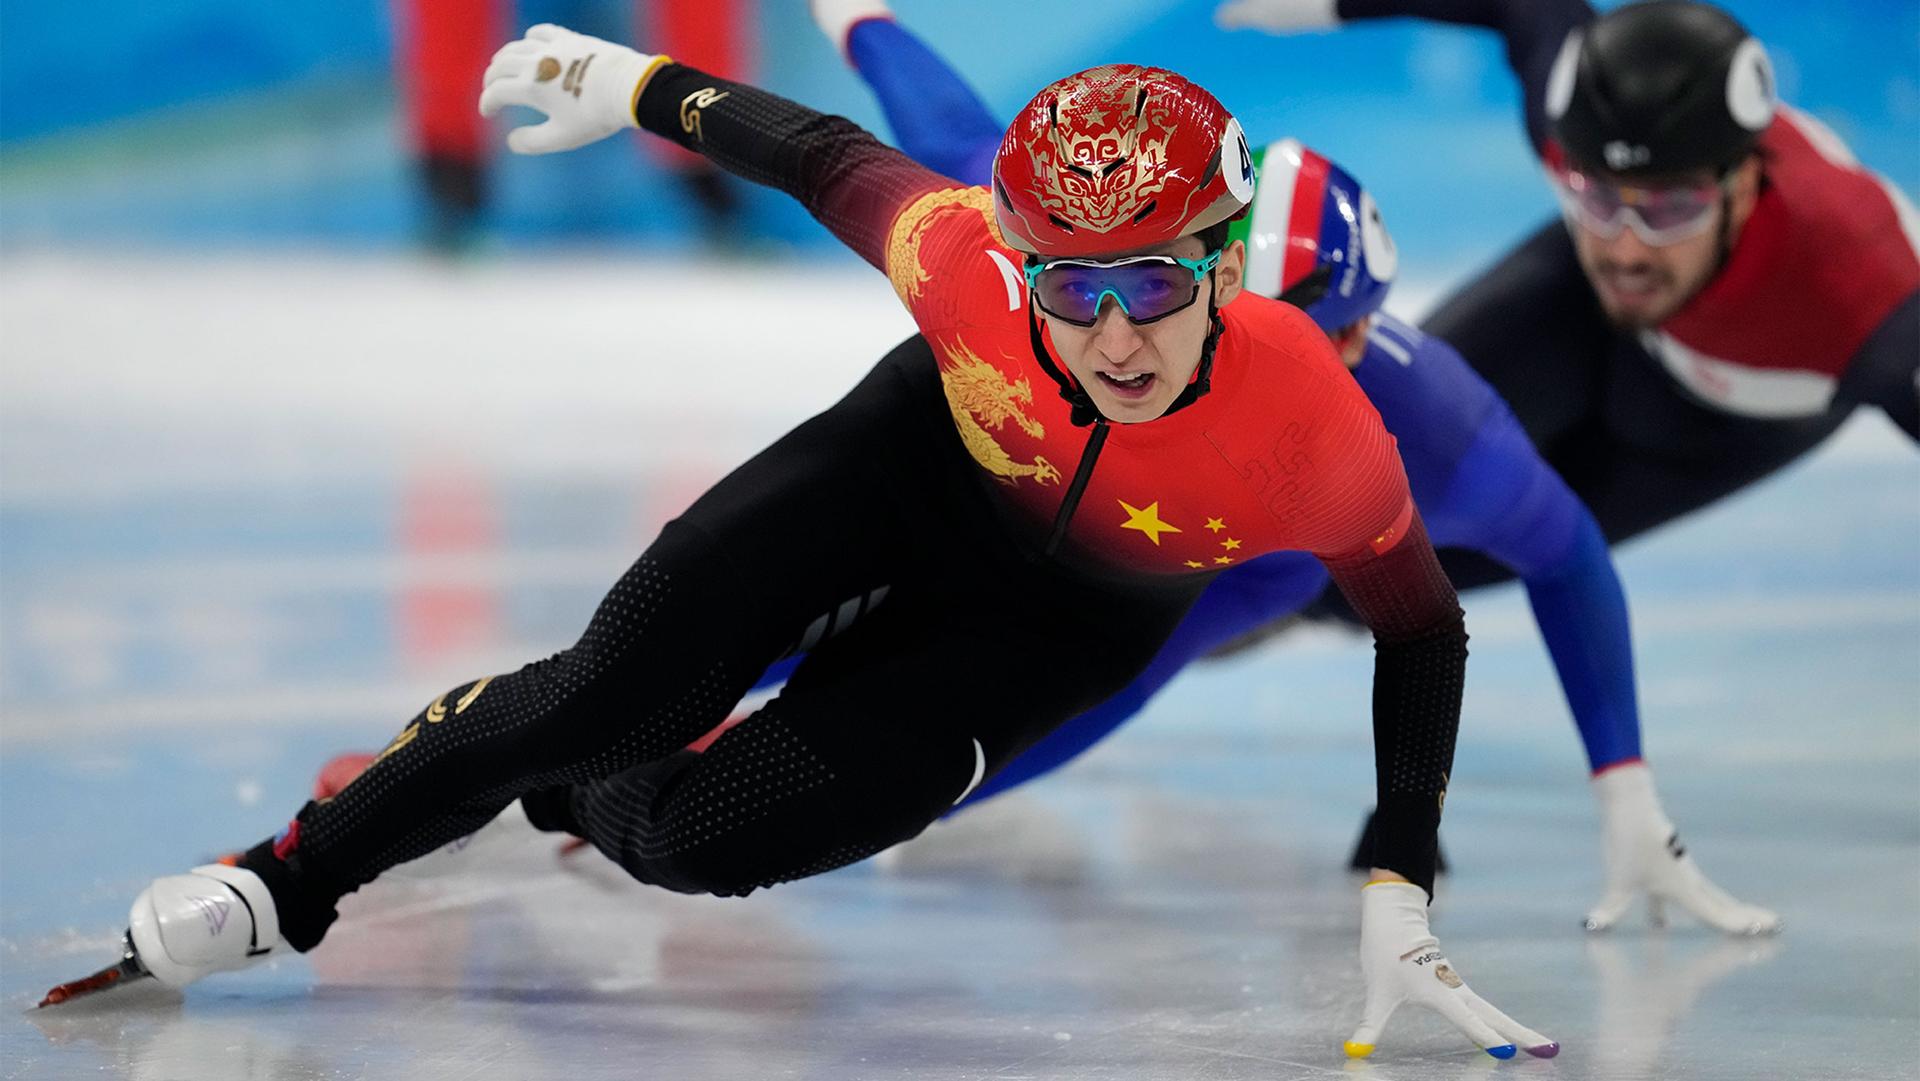 Wu Dajing of China, races in his men's 500-meters heat during the short track speedskating competition at the 2022 Winter Olympics in Beijing